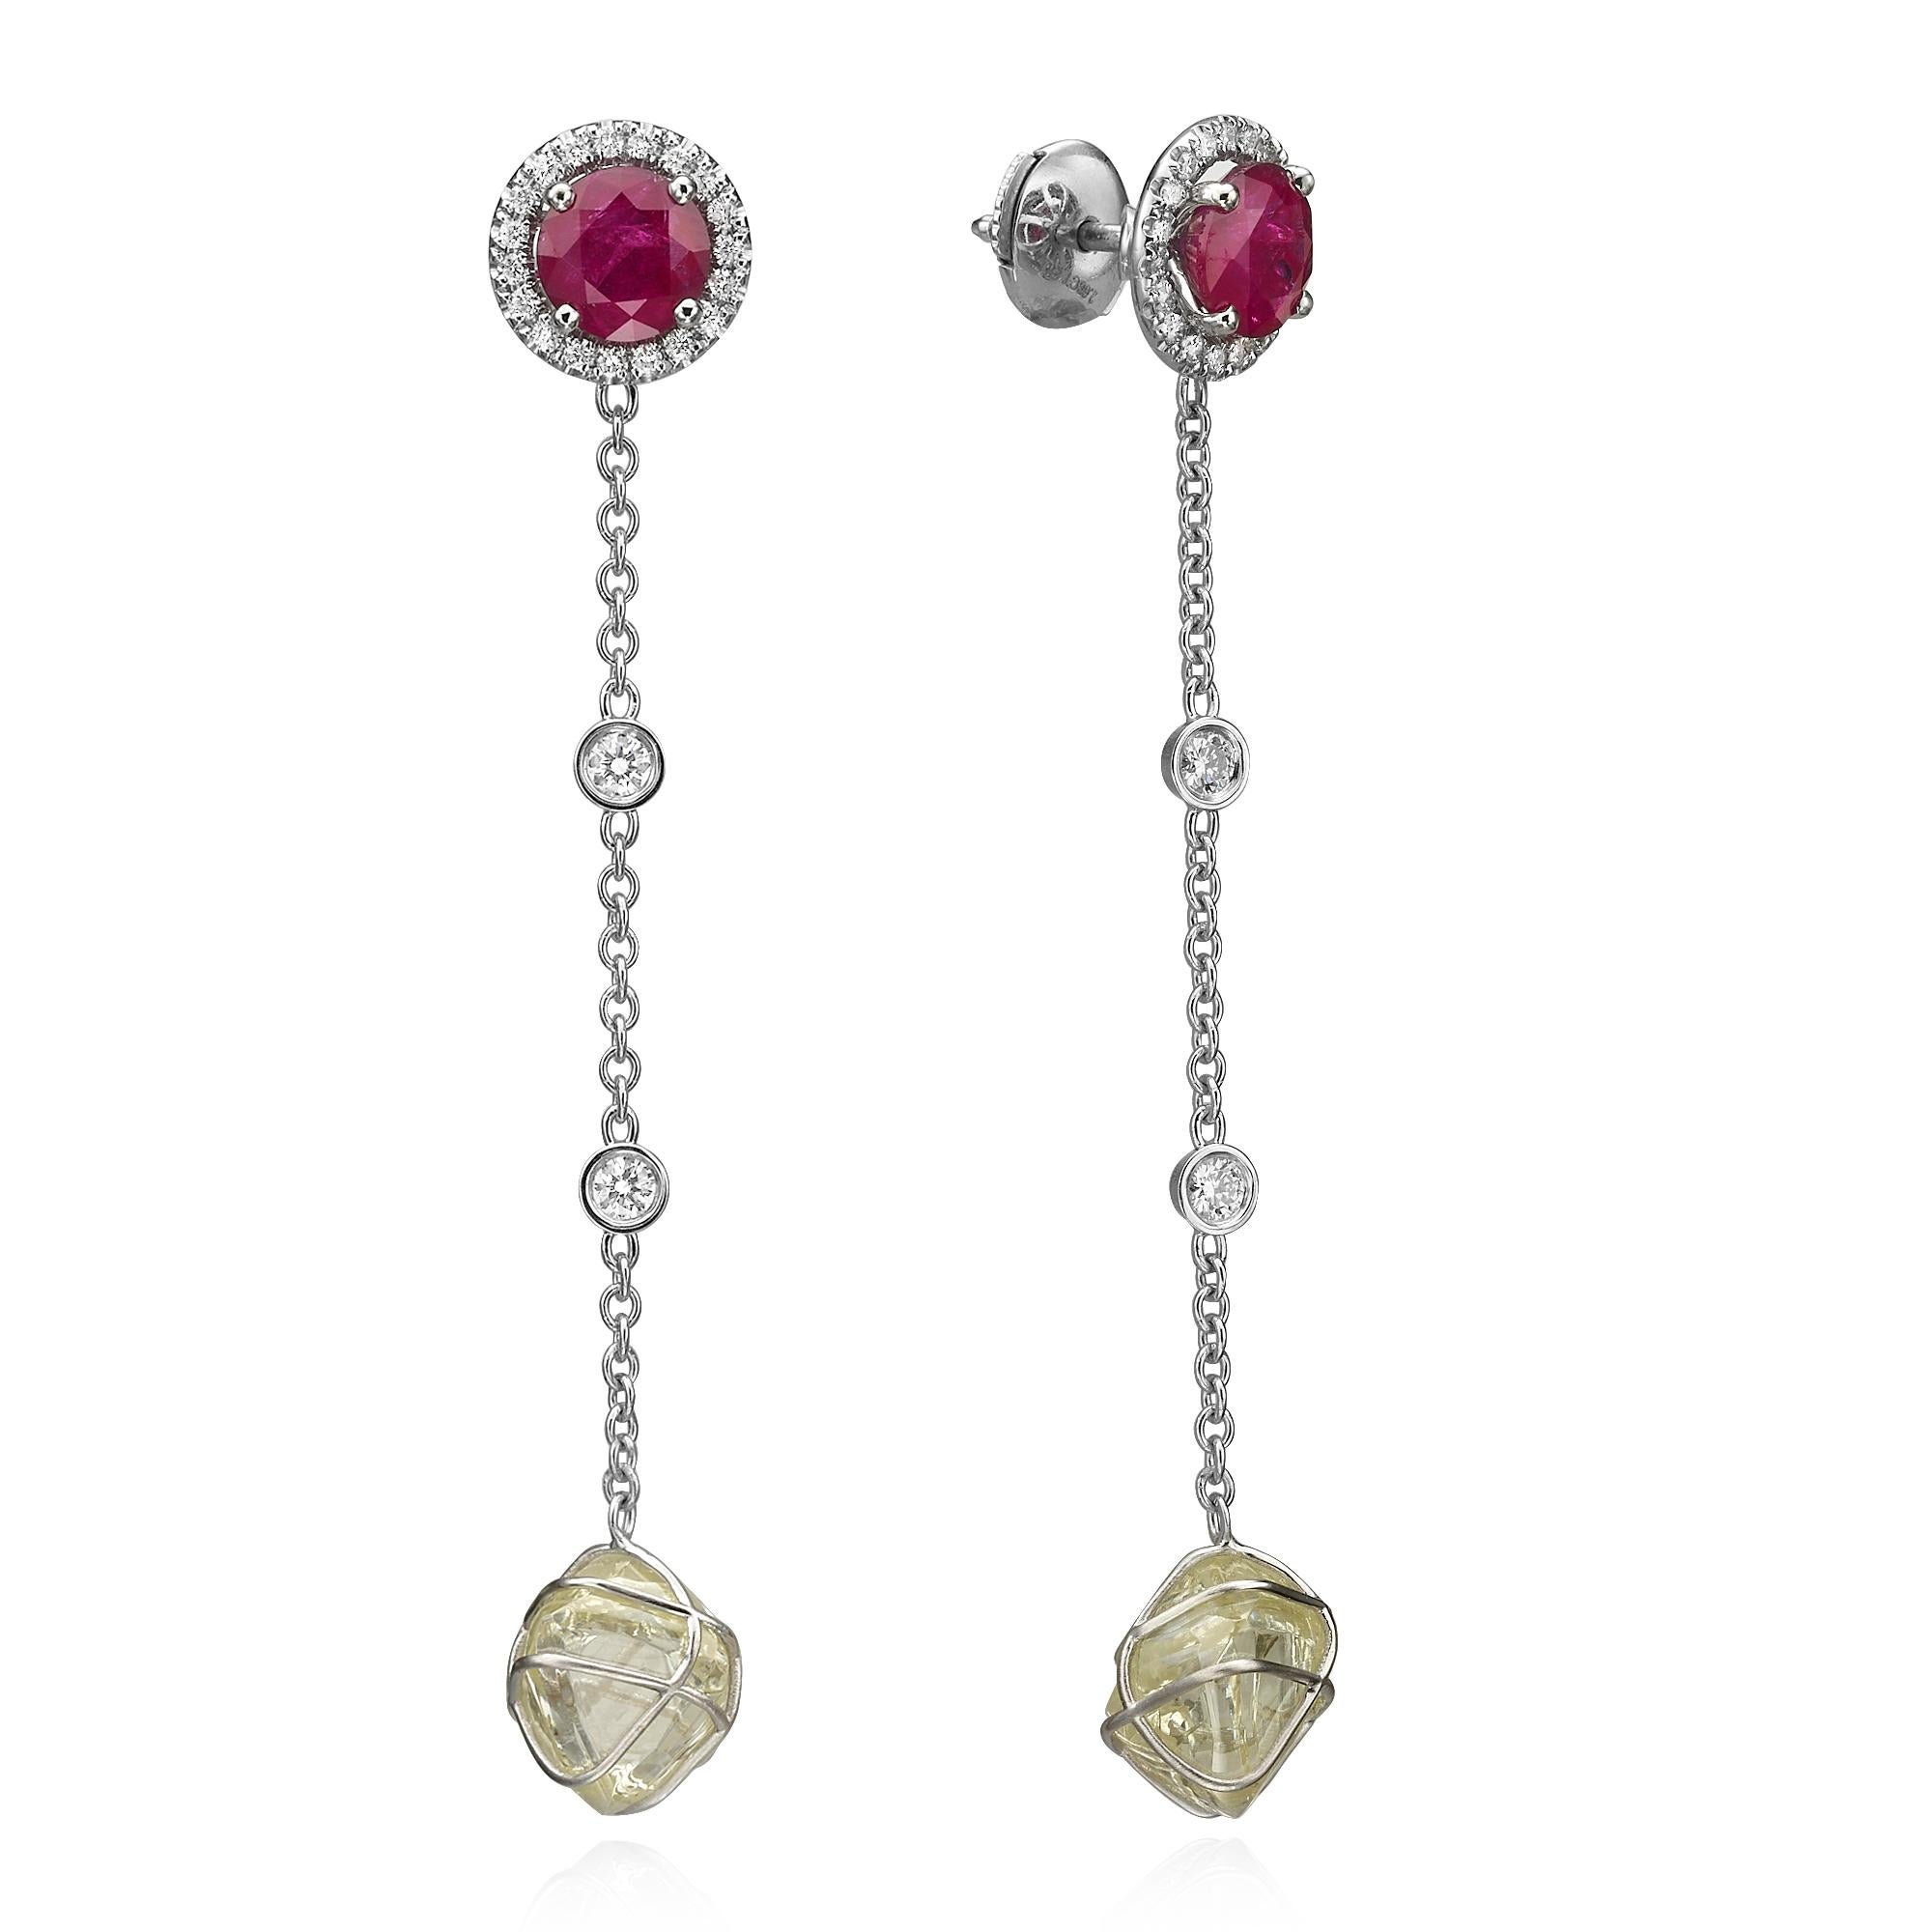 Our handcrafted Dangling earrings 11.15 carat TDW are made with detailed craftsmanship and one of a kind design. Natural Raw diamonds and High quality Round Brilliant Cut diamonds capture the beauty of a diamond evolution from raw to perfection.